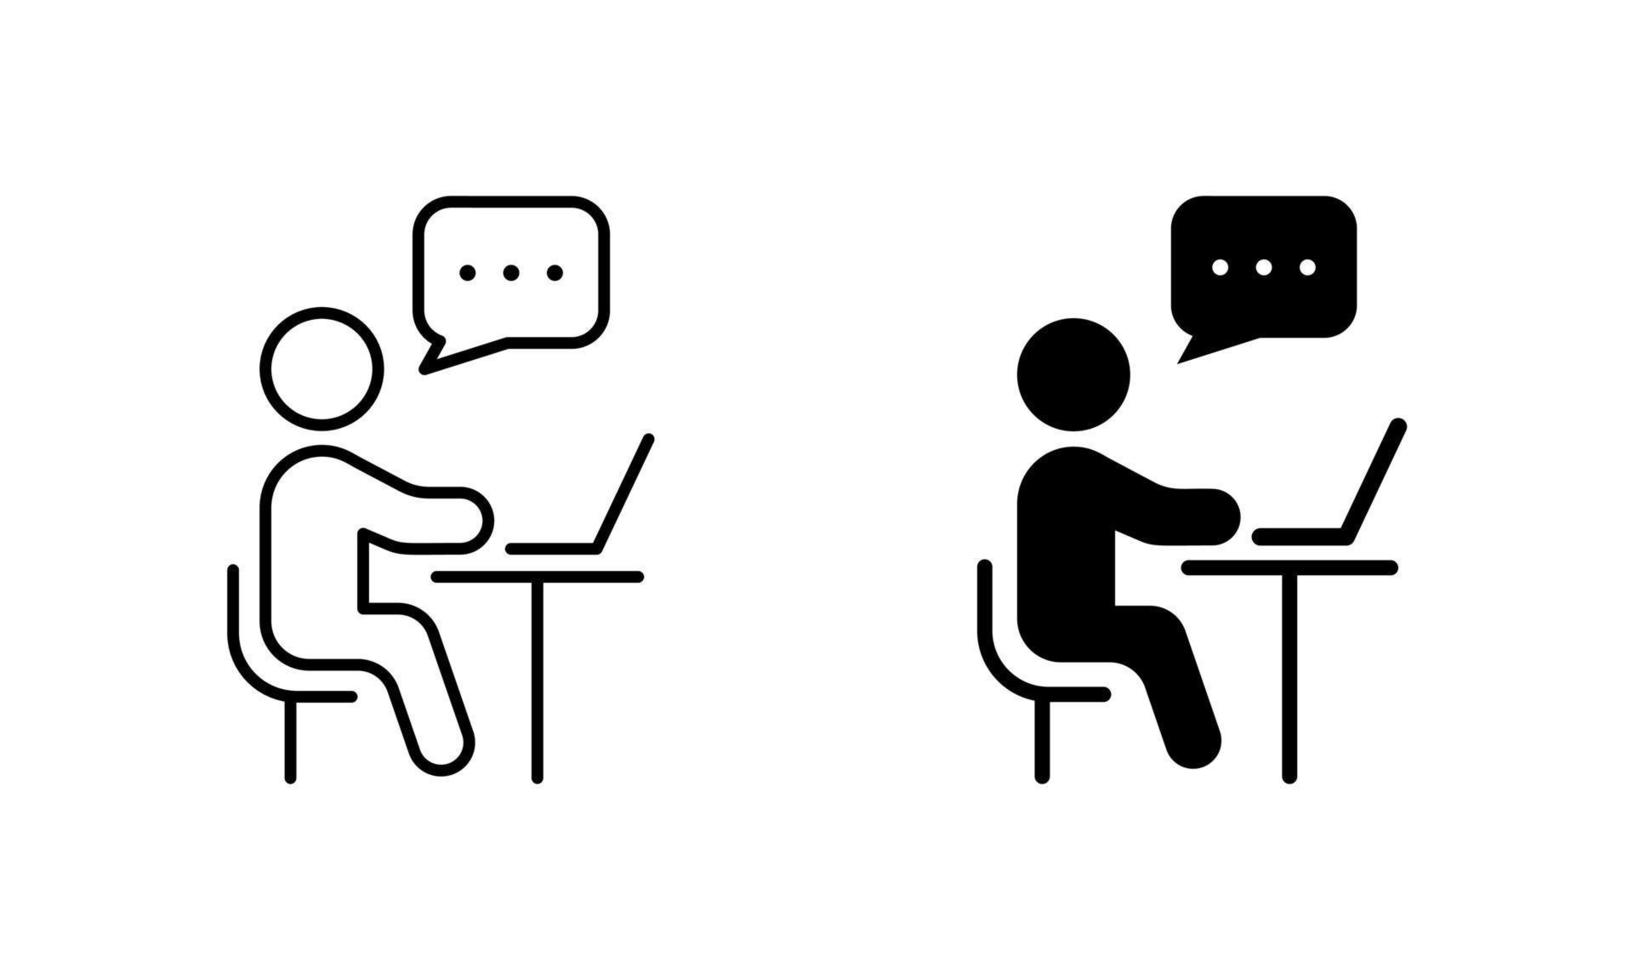 Online Training, Video Conference Chat on Laptop Pictogram Set. Person Sit and Use Computer Silhouette and Line Icon. Virtual Webinar Meeting Discussion. Editable Stroke. Isolated Vector Illustration.